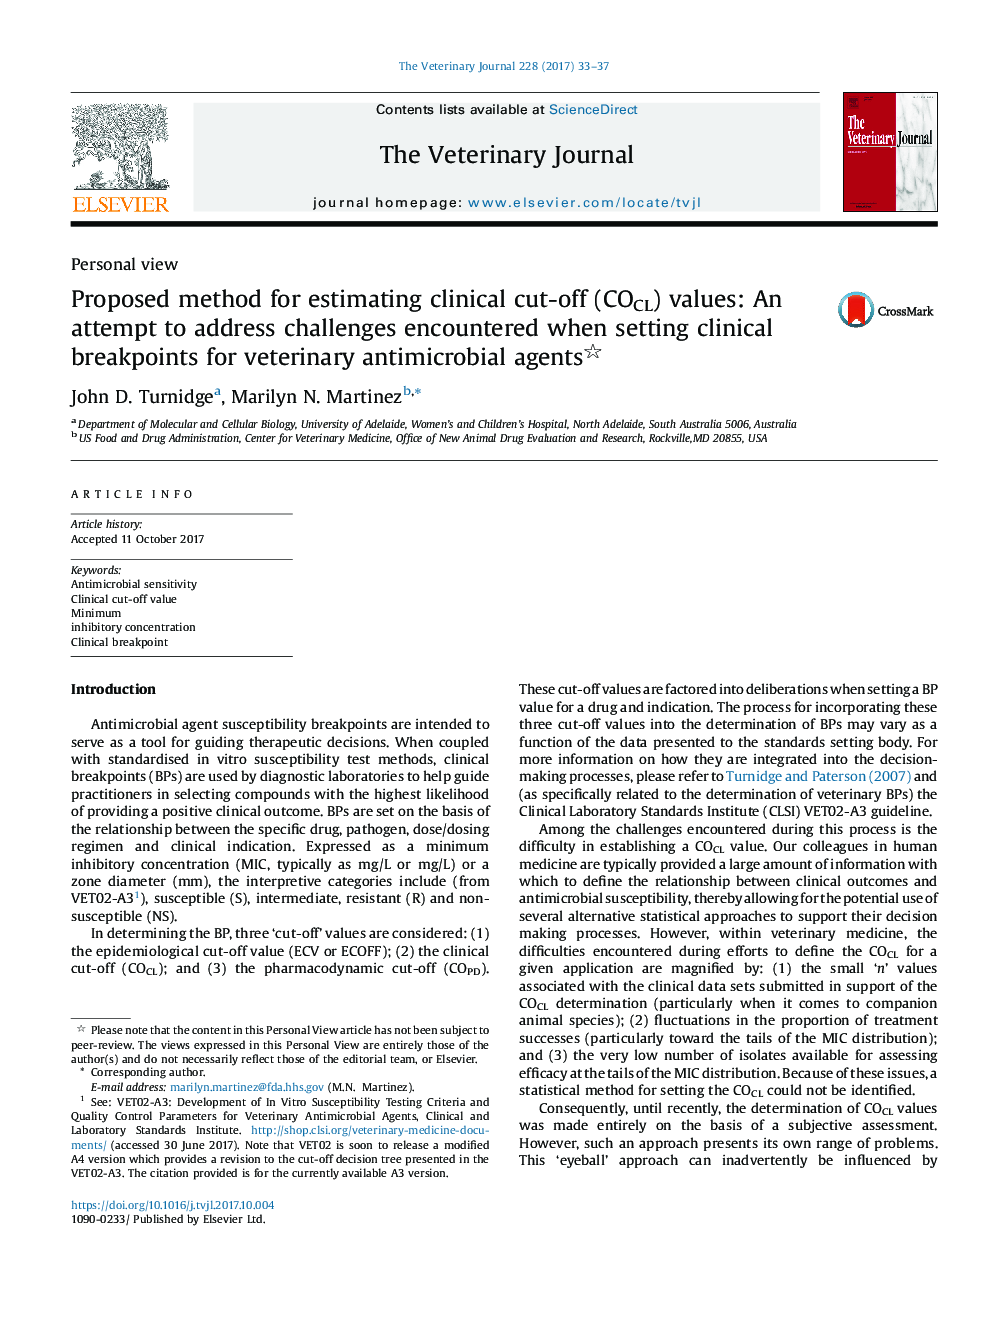 Proposed method for estimating clinical cut-off (COCL) values: An attempt to address challenges encountered when setting clinical breakpoints for veterinary antimicrobial agents